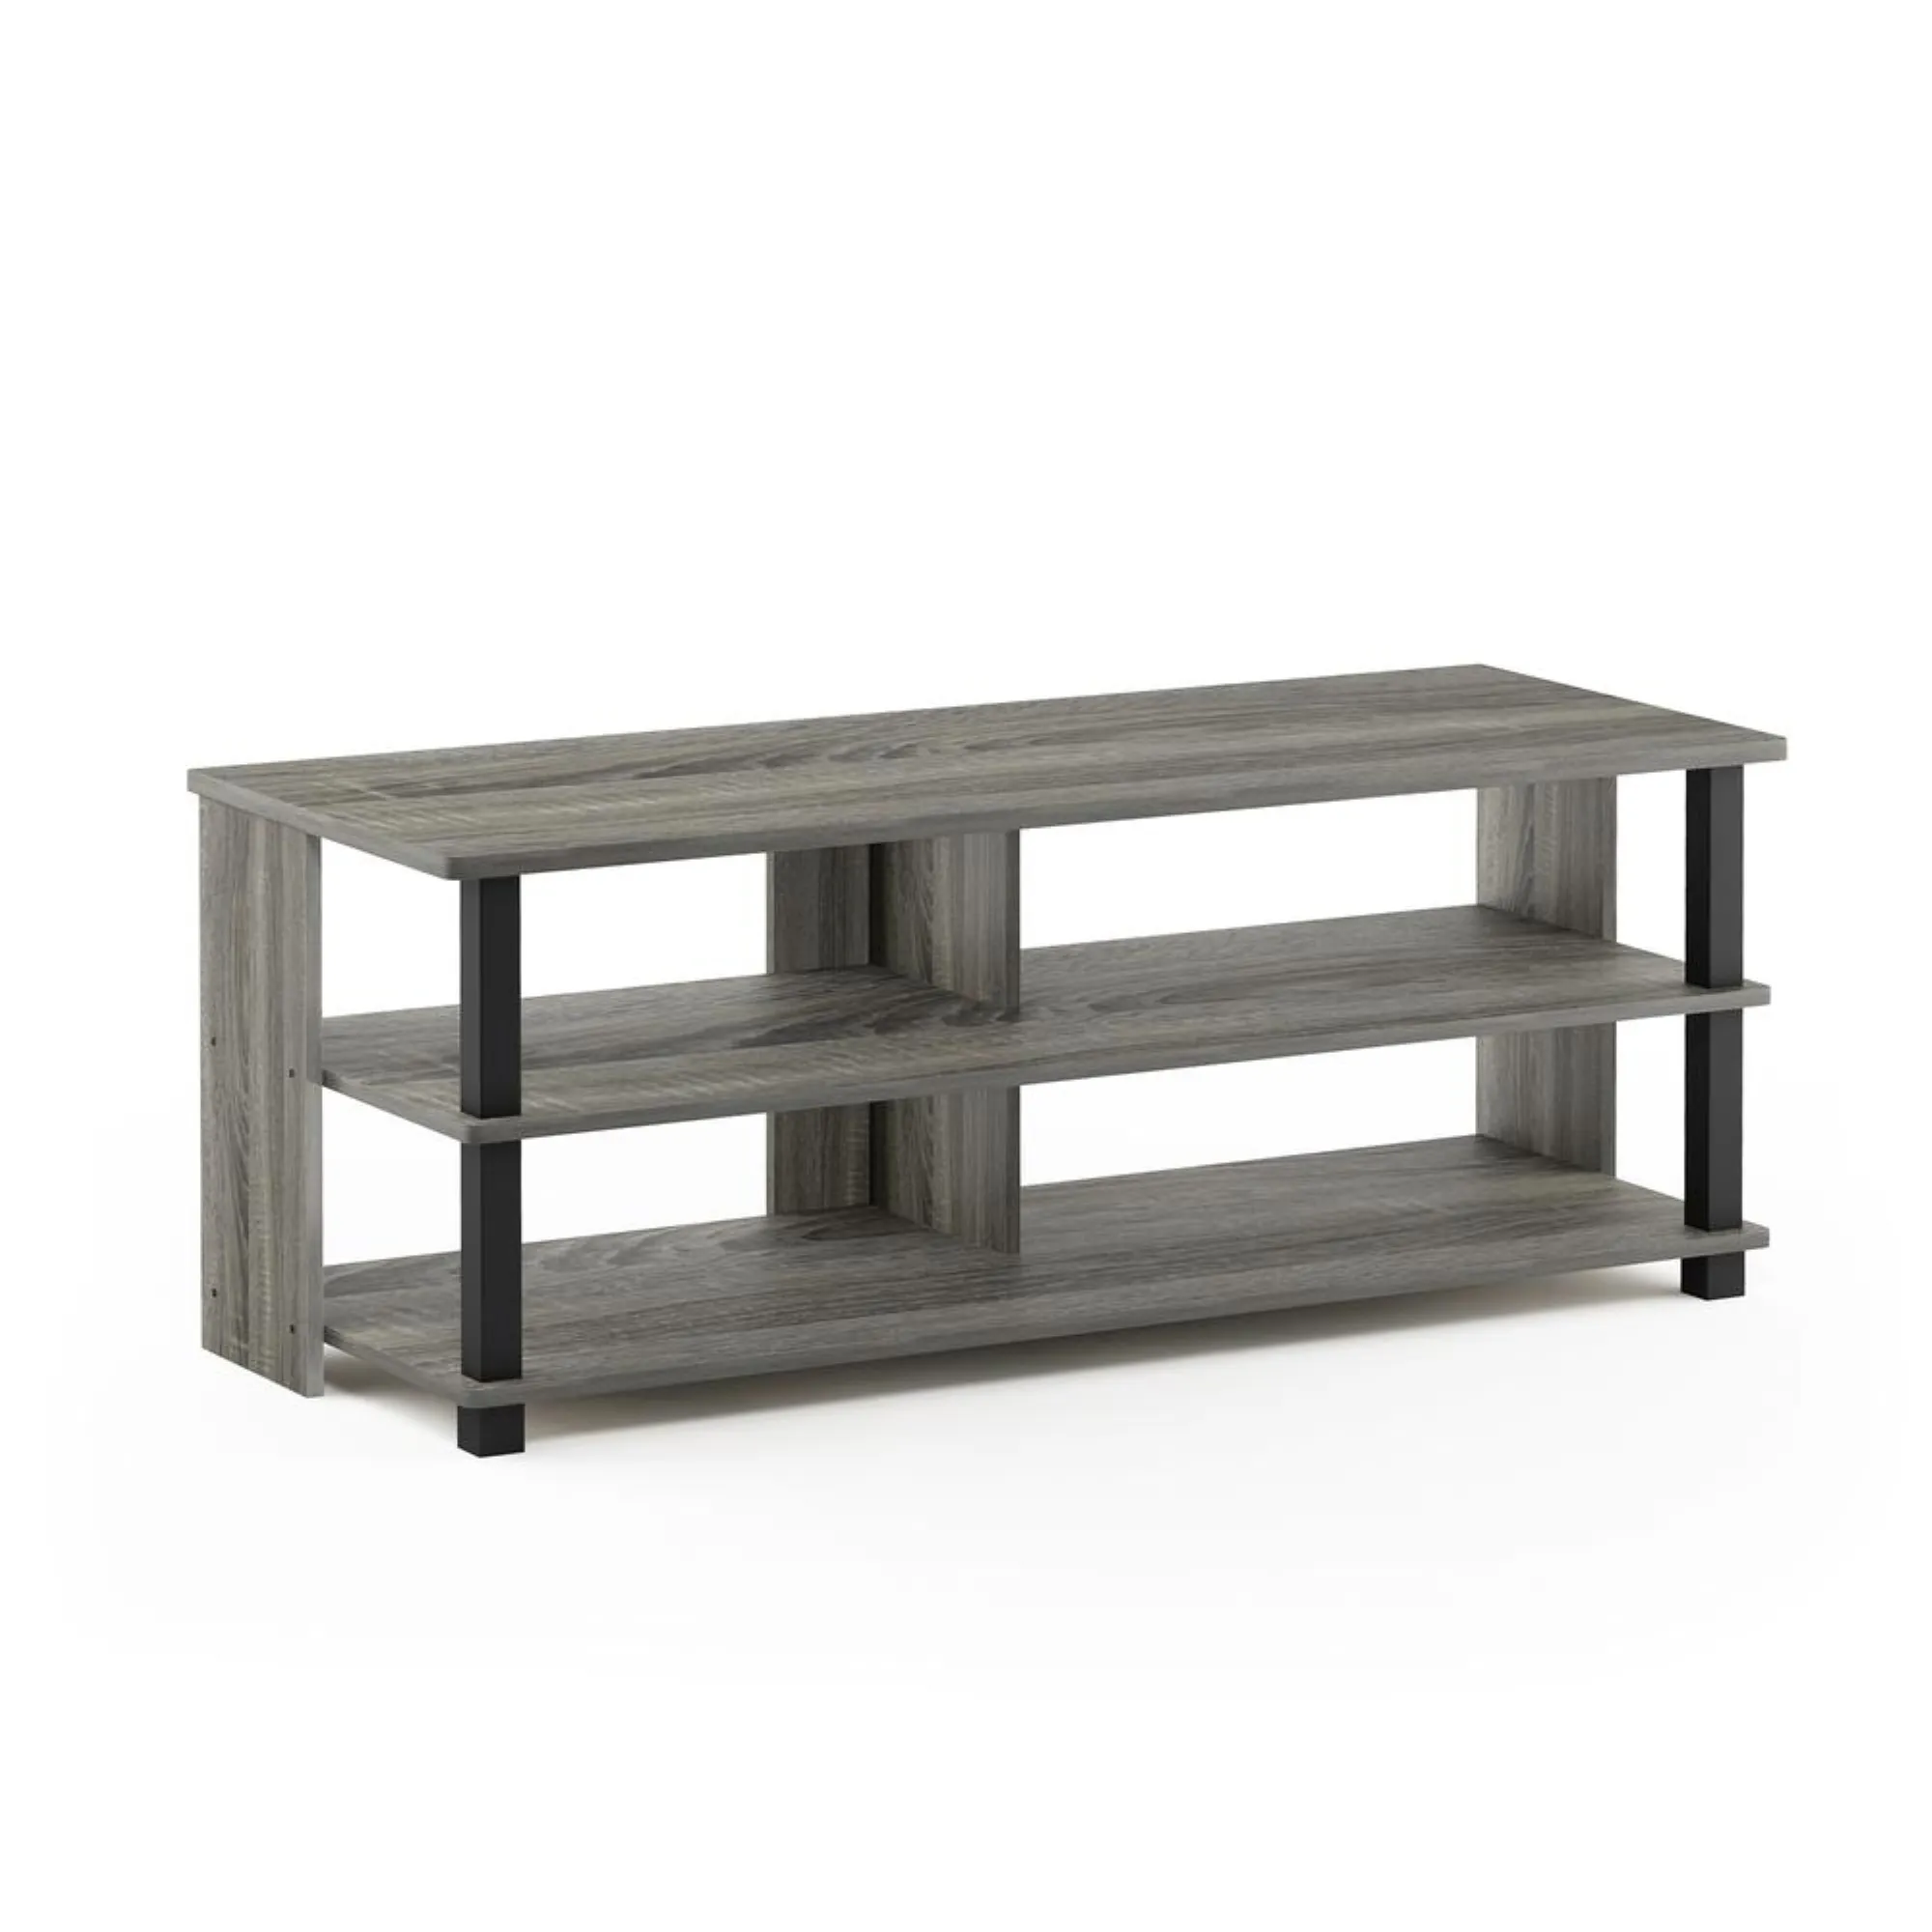 Furinno Sully 3-Tier TV Stand for TV up to 50, French Oak Grey/Black, 17077GYW/BK